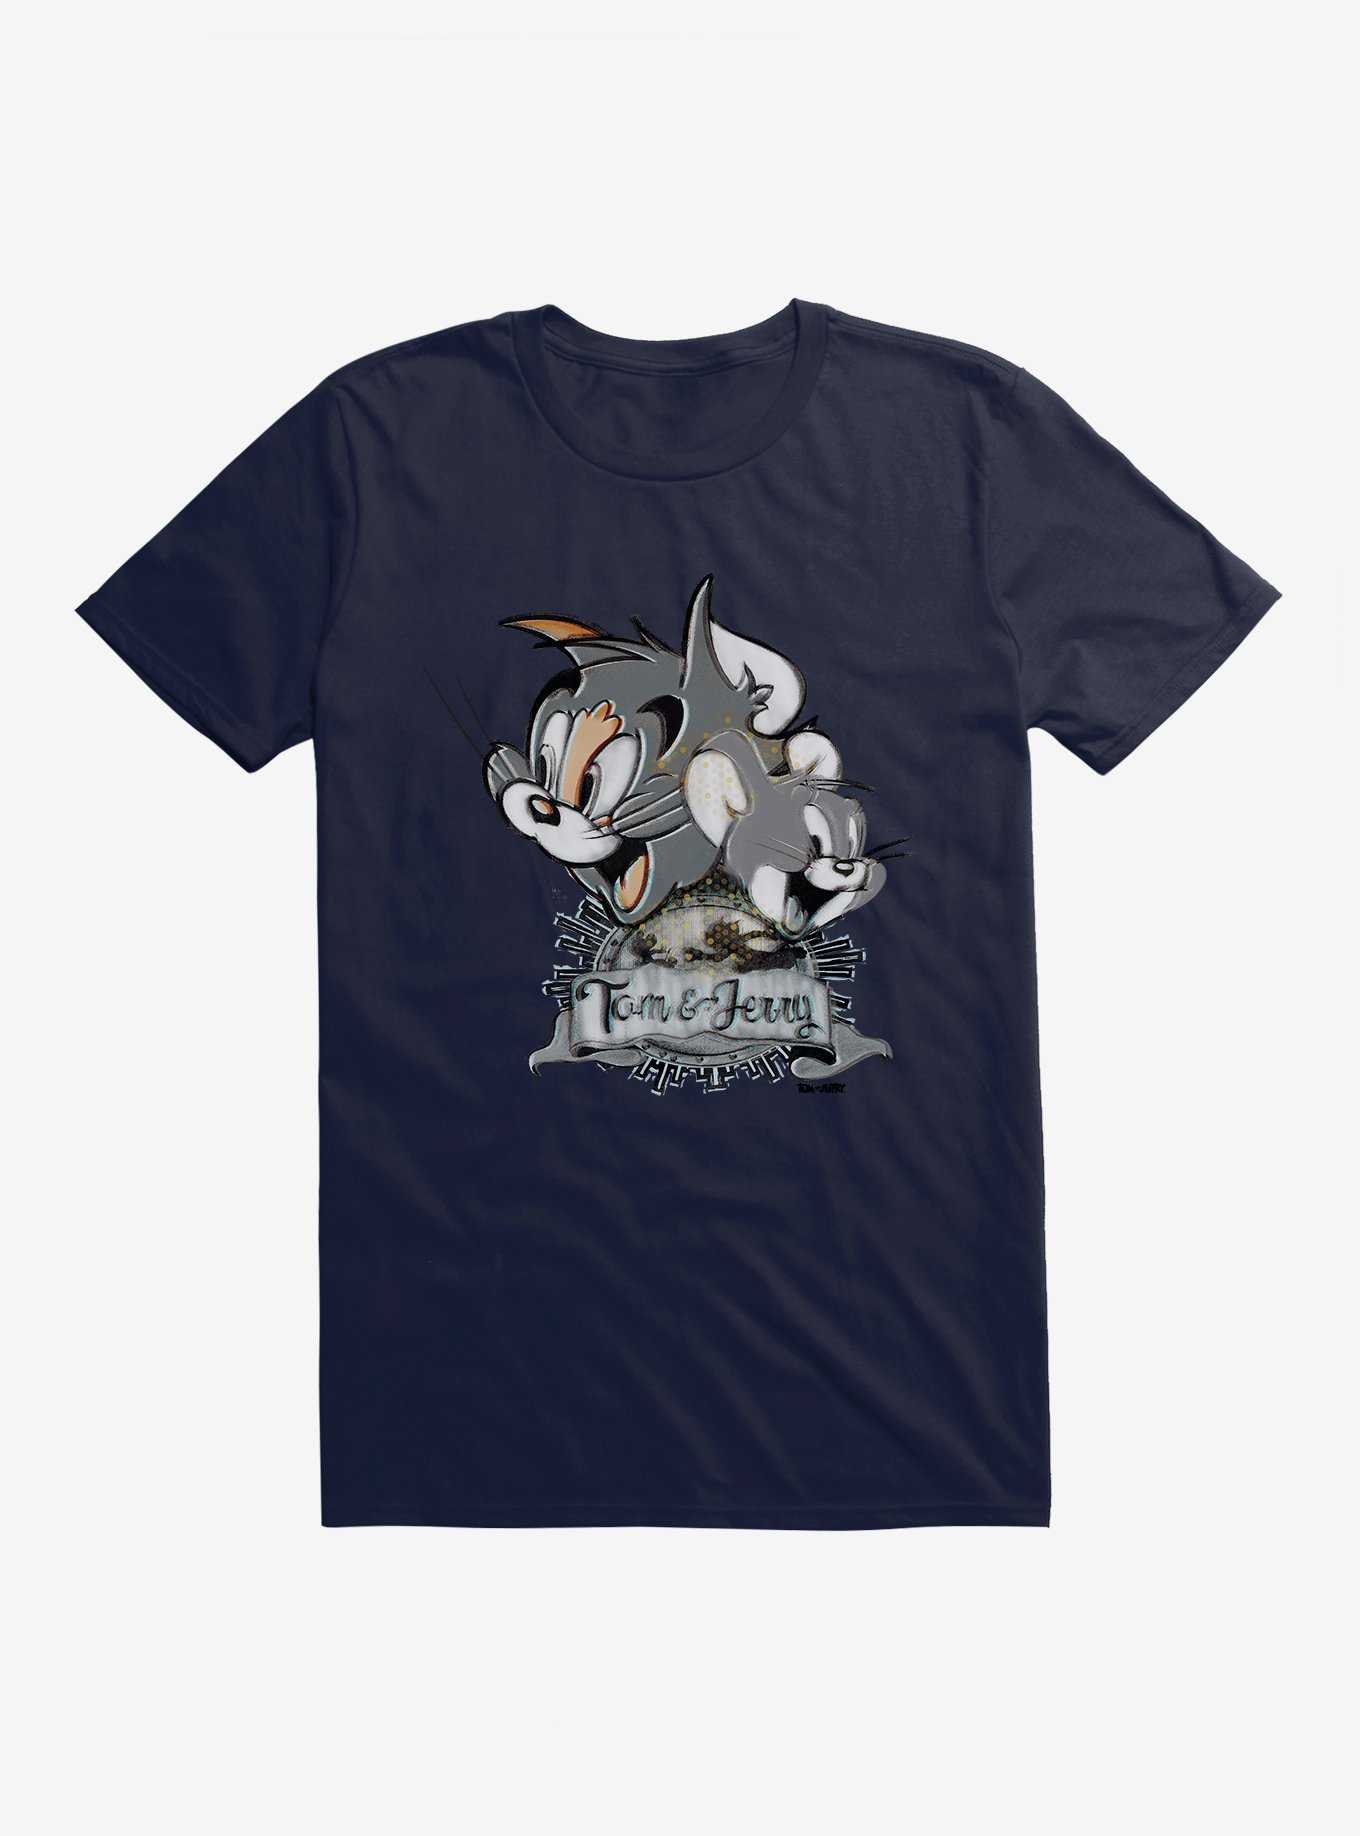 Tom And Jerry Vintage Banner T-Shirt, NAVY, hi-res